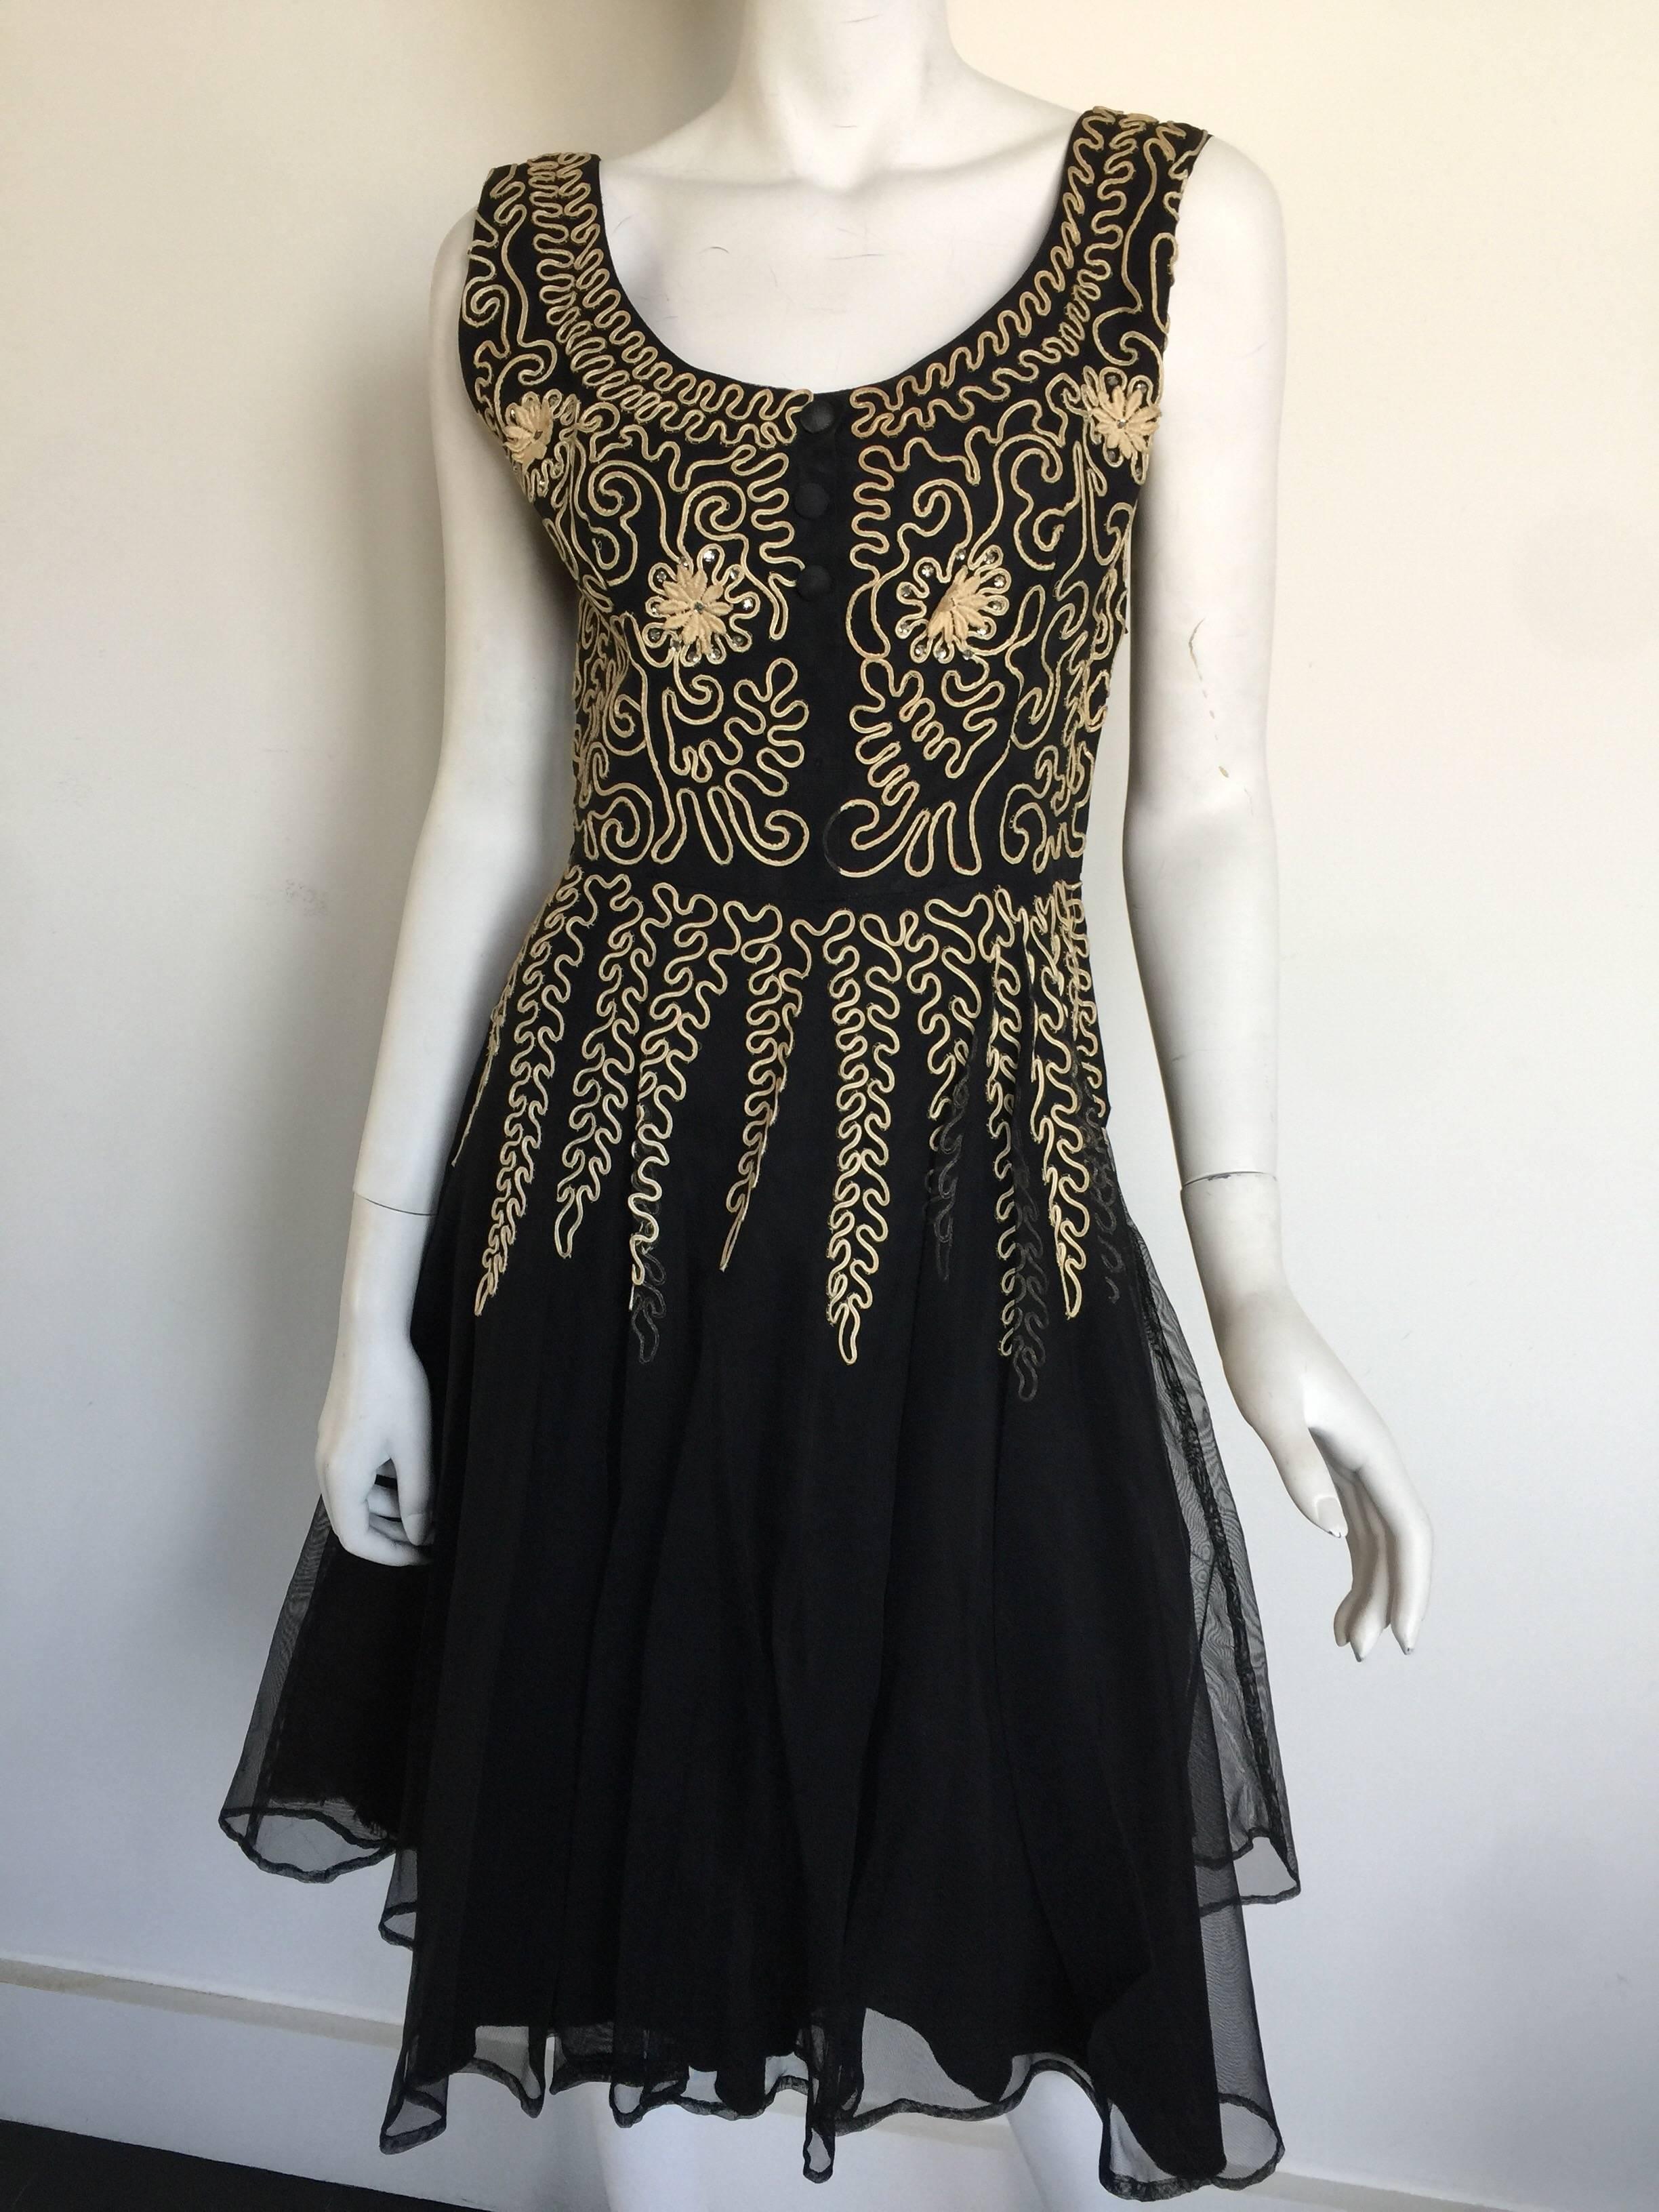 This black tulle dress has an off white ivory ribbon detail and crystal flowers.  The dress is from a NY Atelier and is most likely from the 1960s.  The dress is missing two of the original buttons and has slight discoloration but is still a special